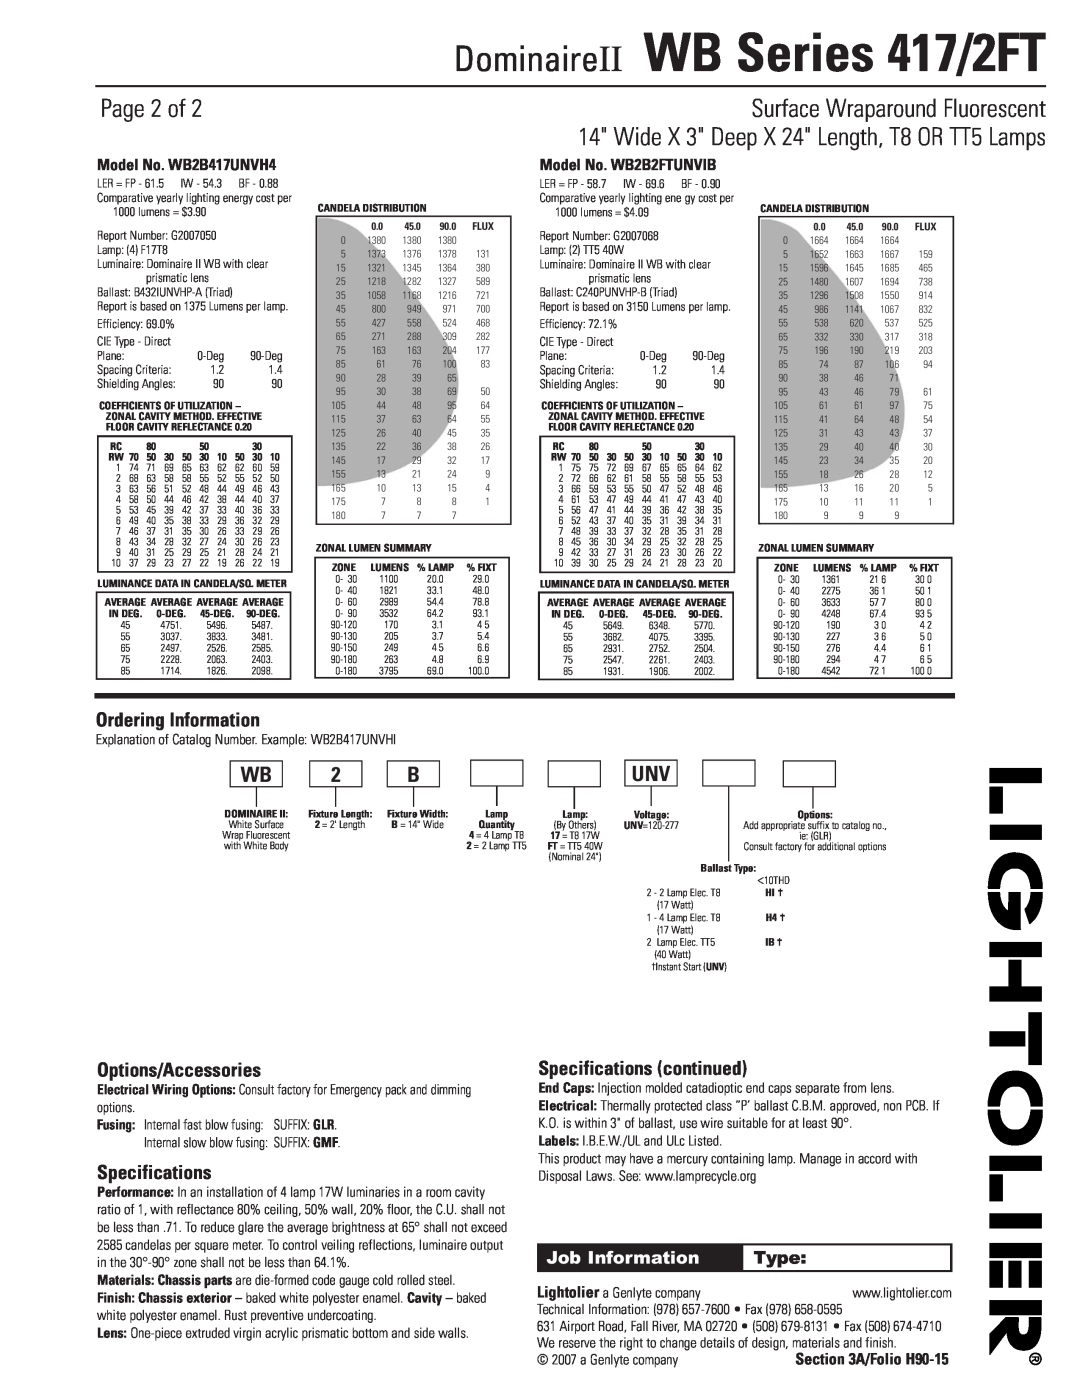 Lightolier WB Series 2FT Page 2 of, Ordering Information, Options/Accessories, Specifications continued, Type 